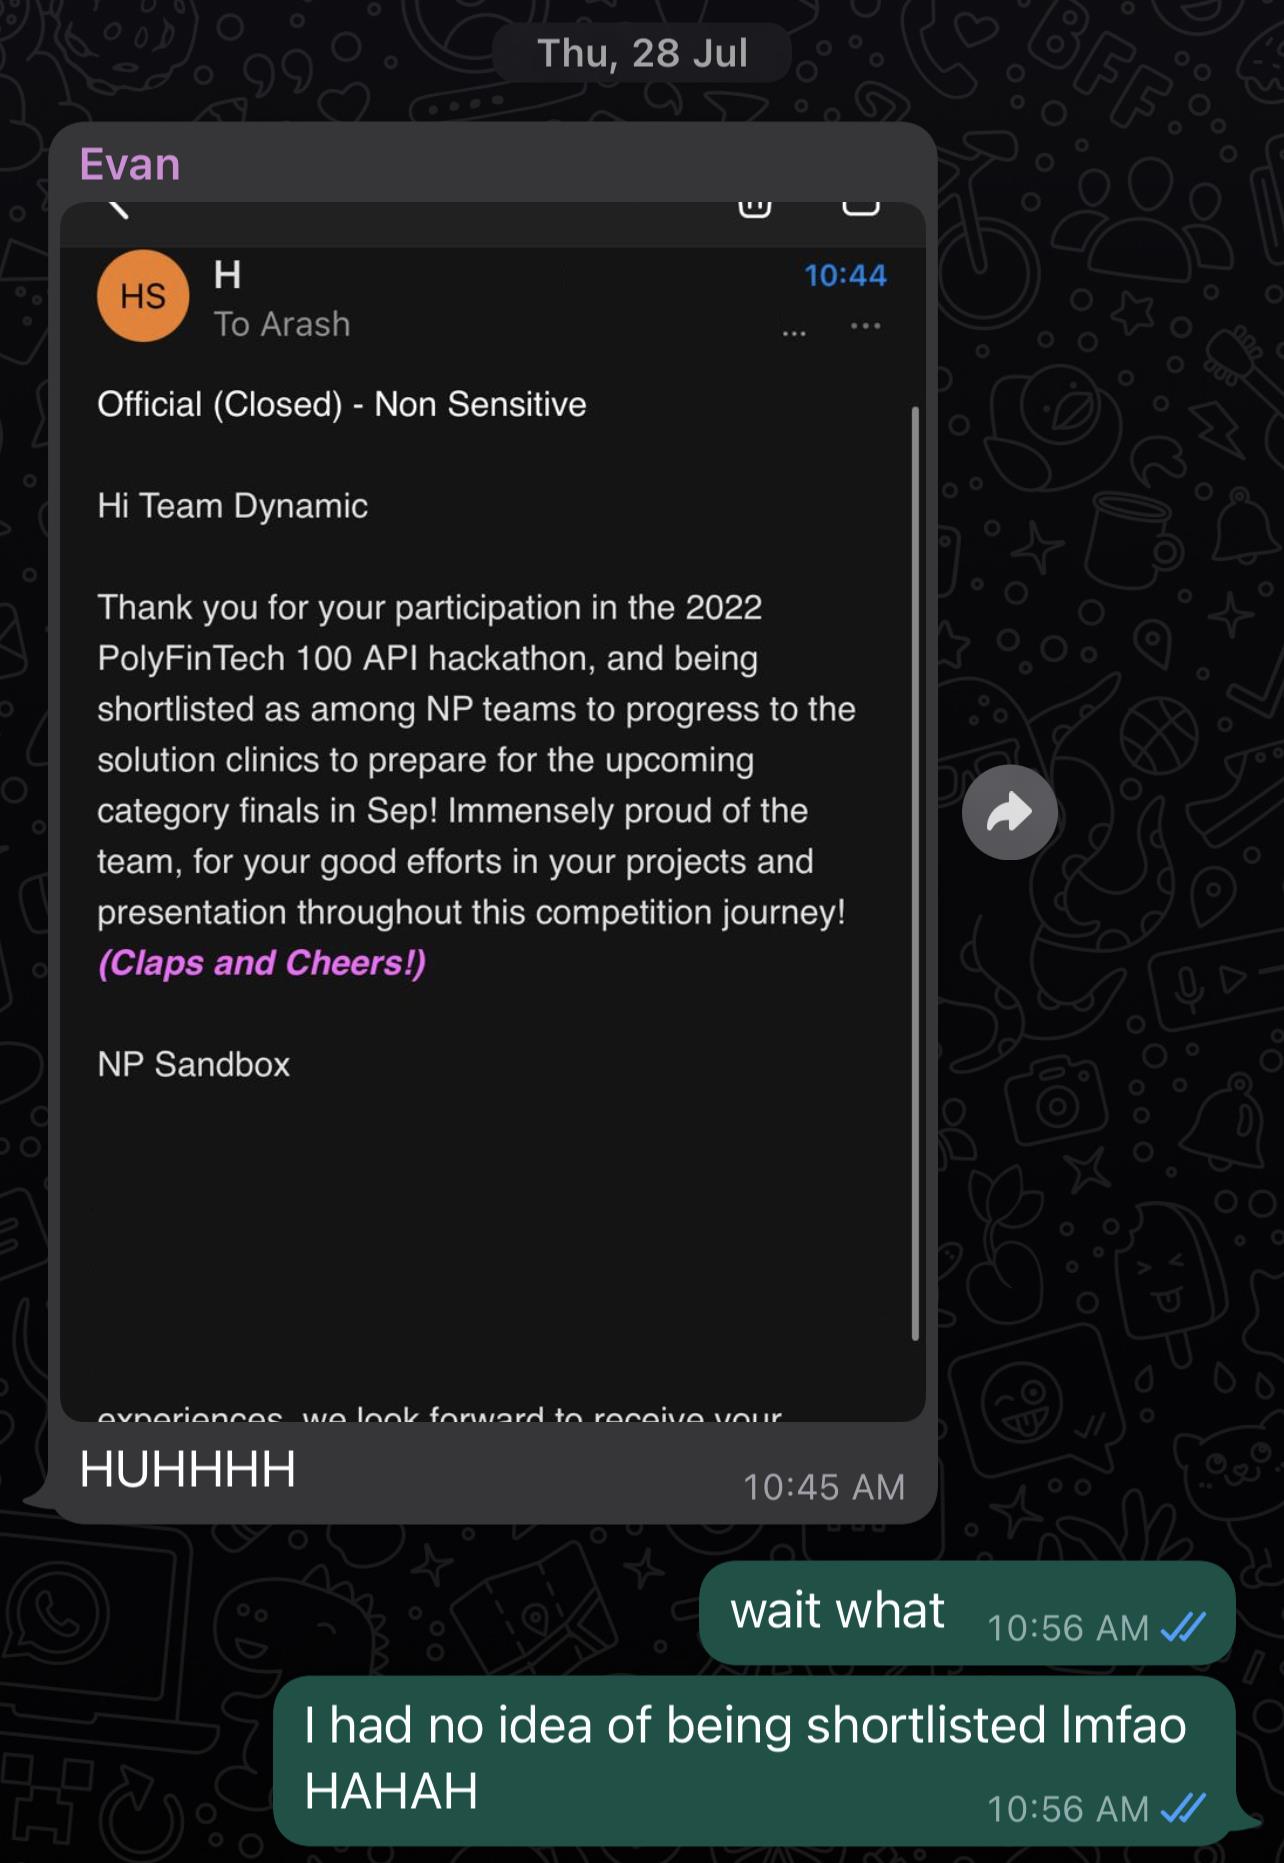 Three messages on the screen, one from a team member named Evan and two from me. Evan replies "HUHHHH" to a screenshot saying "Thank you for your participation in the 2022 PolyFinTech 100 API hackathon, and being shortlisted as among NP teams to progress to the solution clinics to prepare for the upcoming category finals in Sep!". I reply with "wait what" and "I had no idea of being shortlisted lmfao HAHAH".